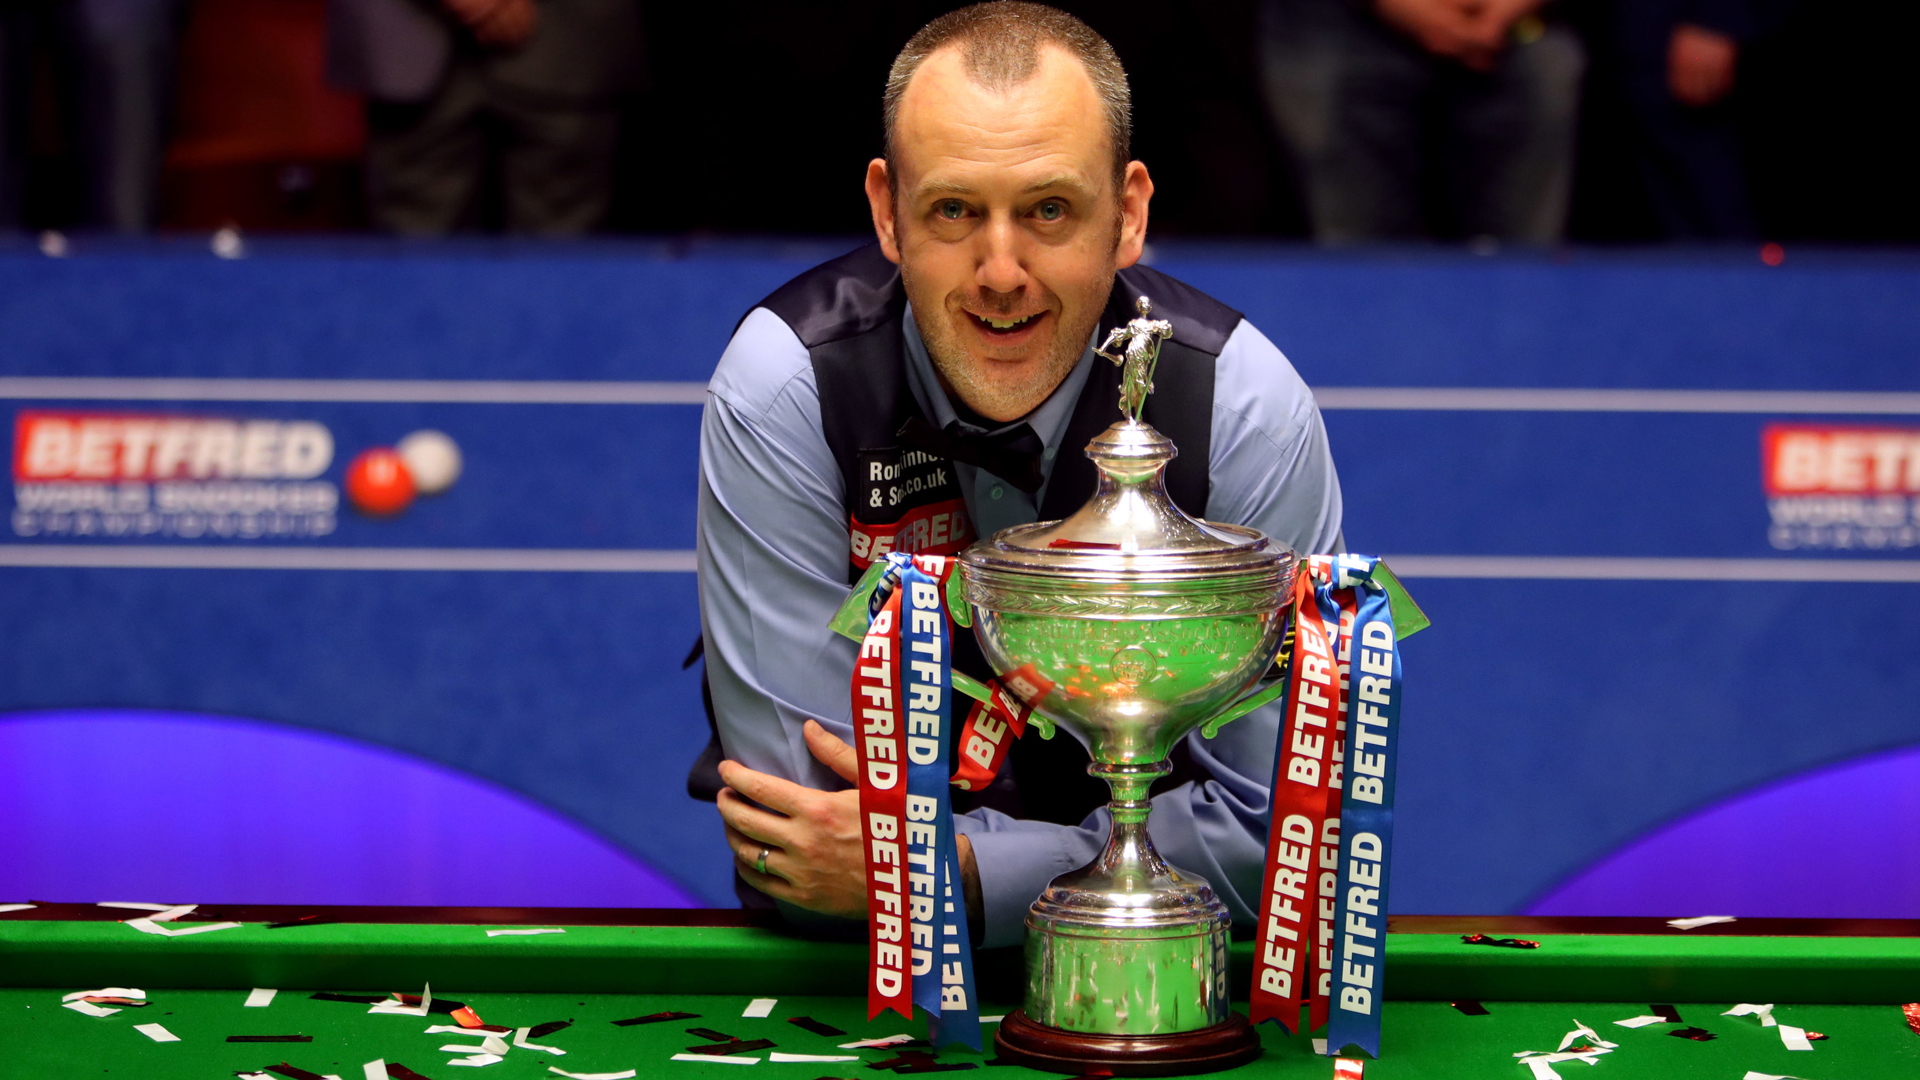 Relive our coverage of John Higgins v Mark Williams from the Crucible